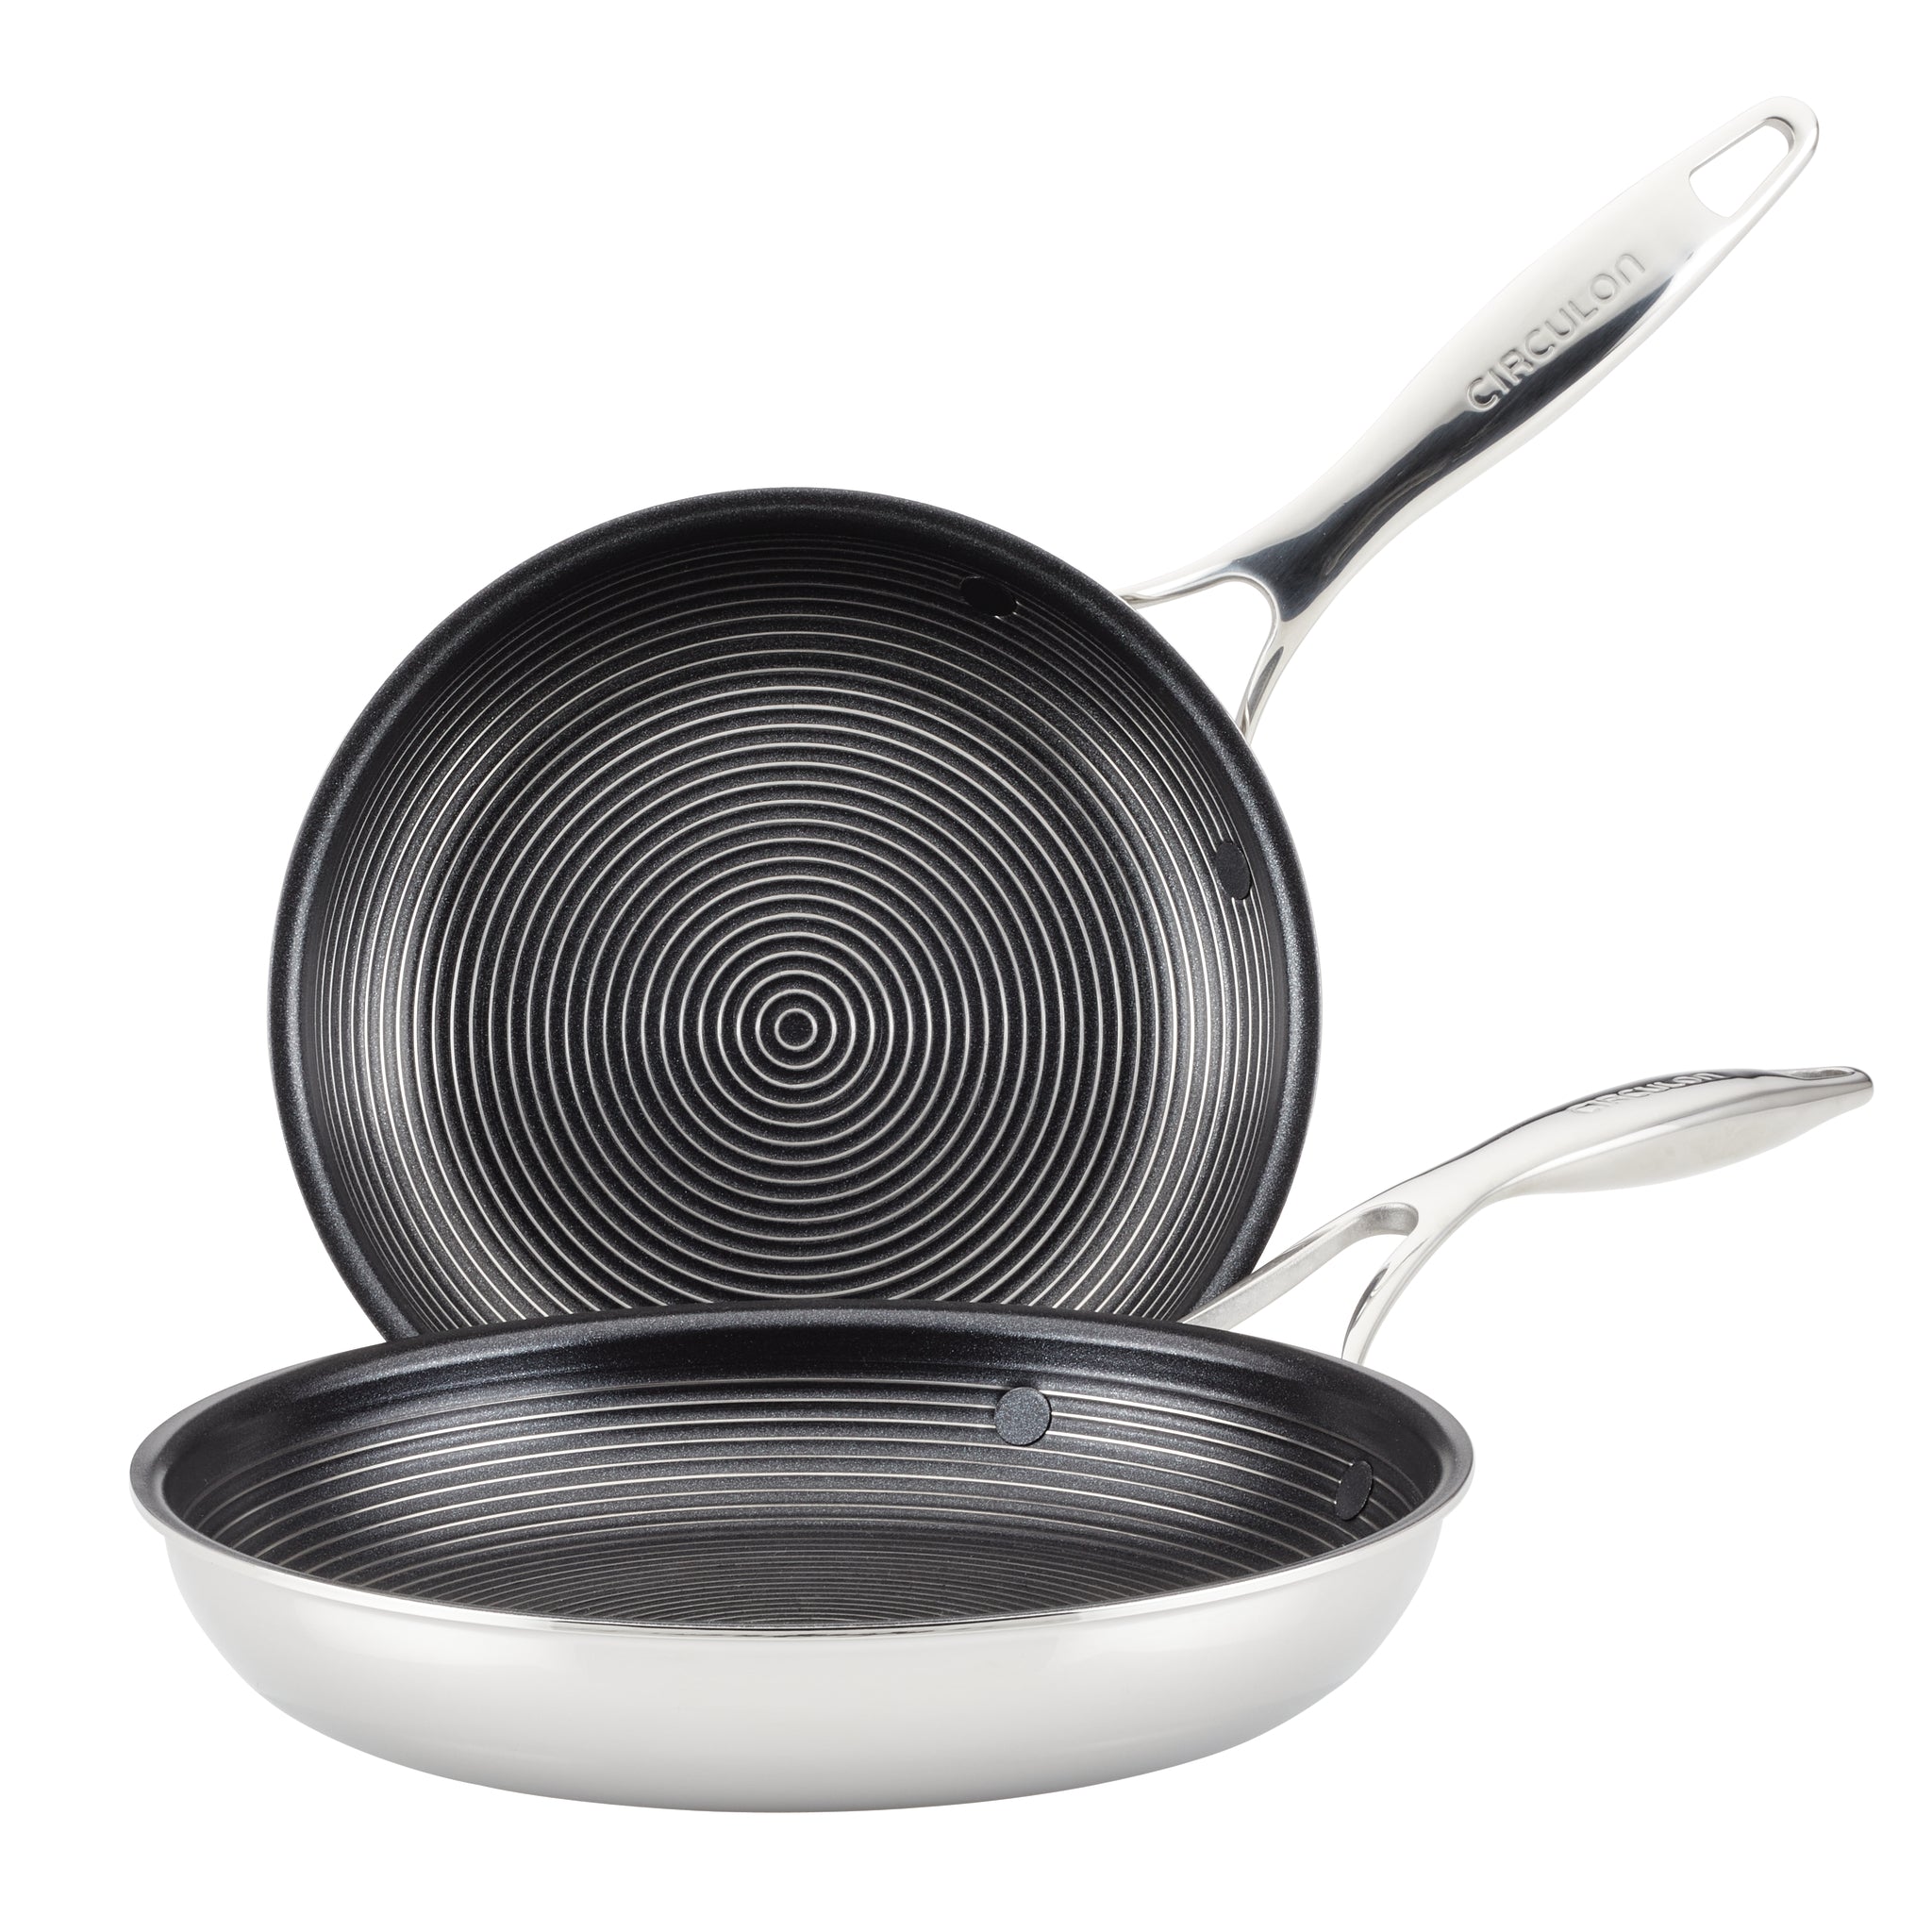 3-Piece Perfect Results Premium Nonstick Springform Pan Set, (8, 9 and  10-Inch)